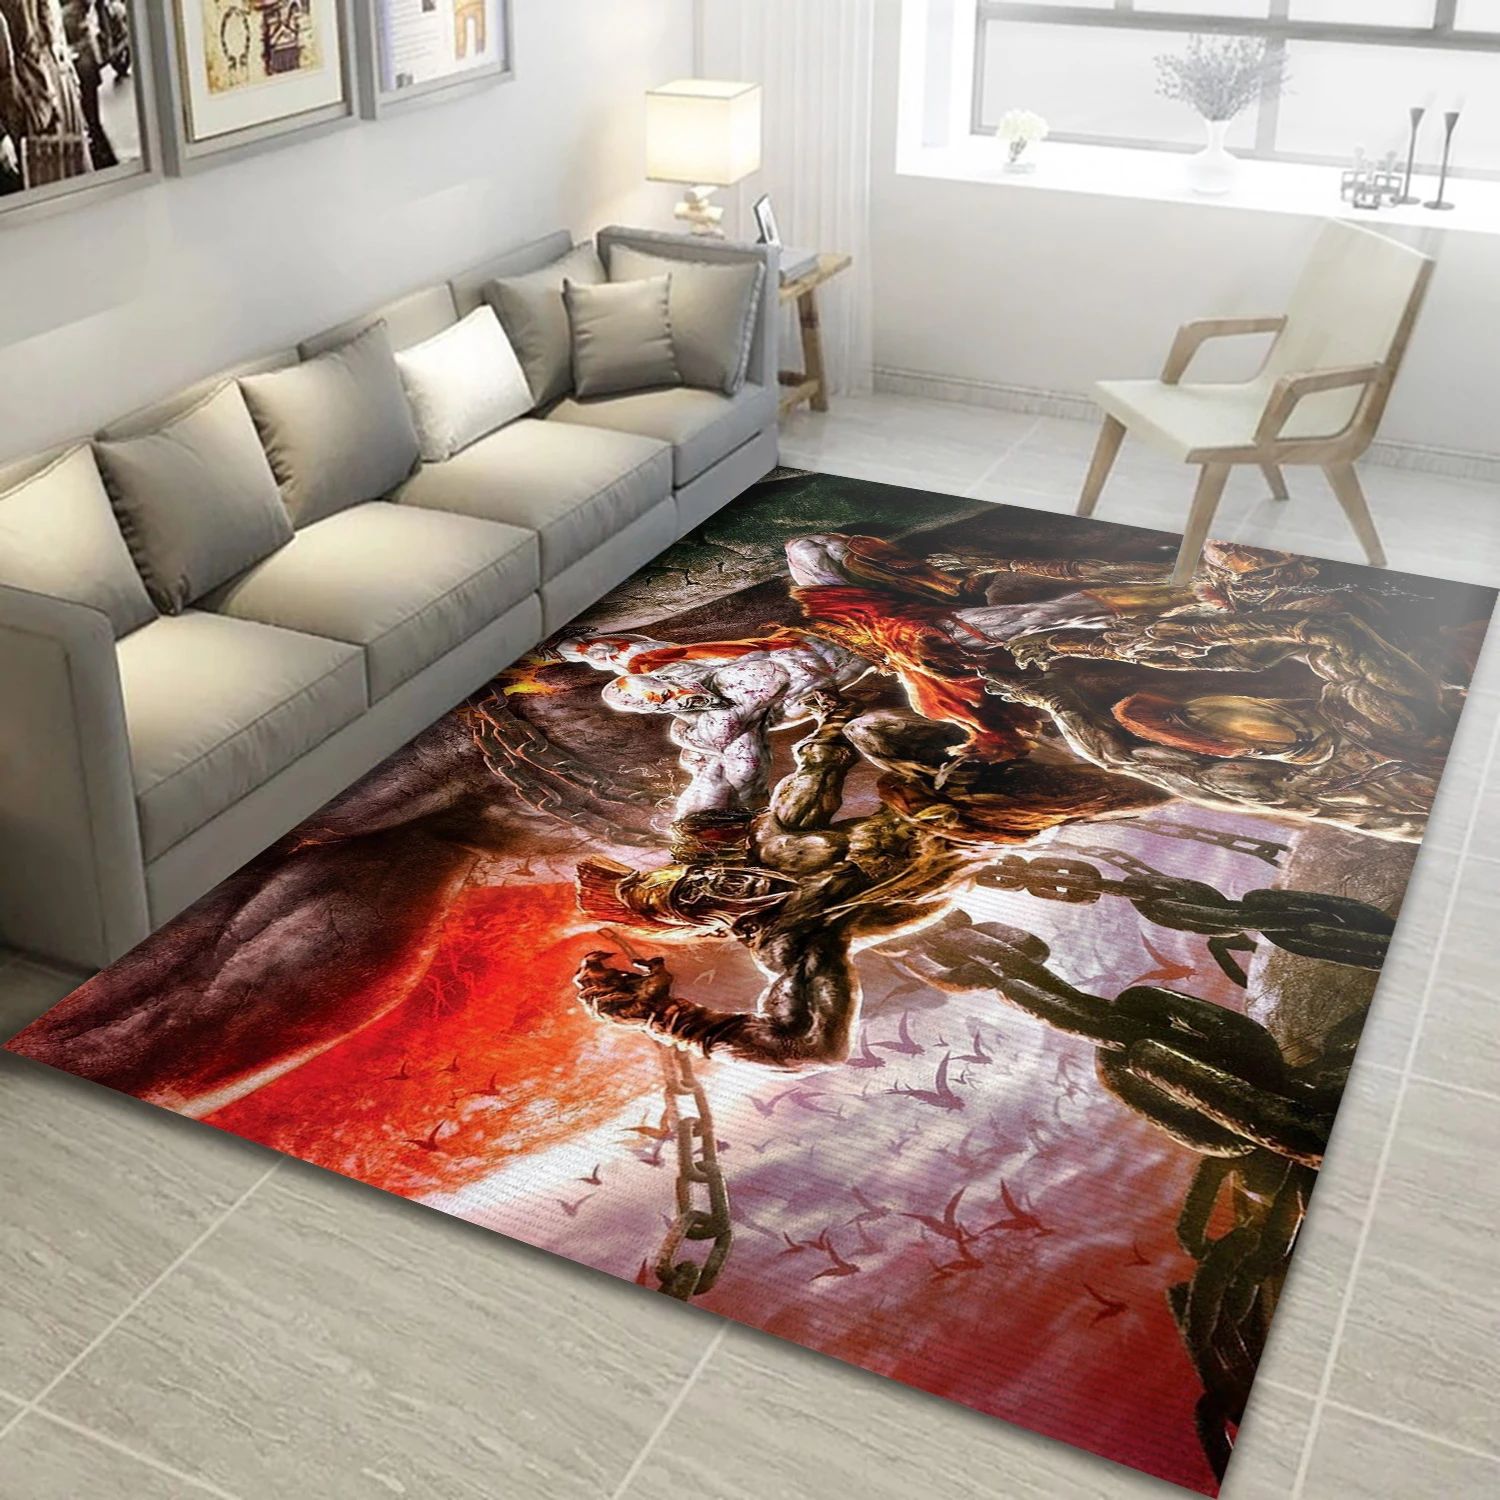 God Of War Video Game Area Rug Area, Living Room Rug - Christmas Gift Decor - Indoor Outdoor Rugs 2